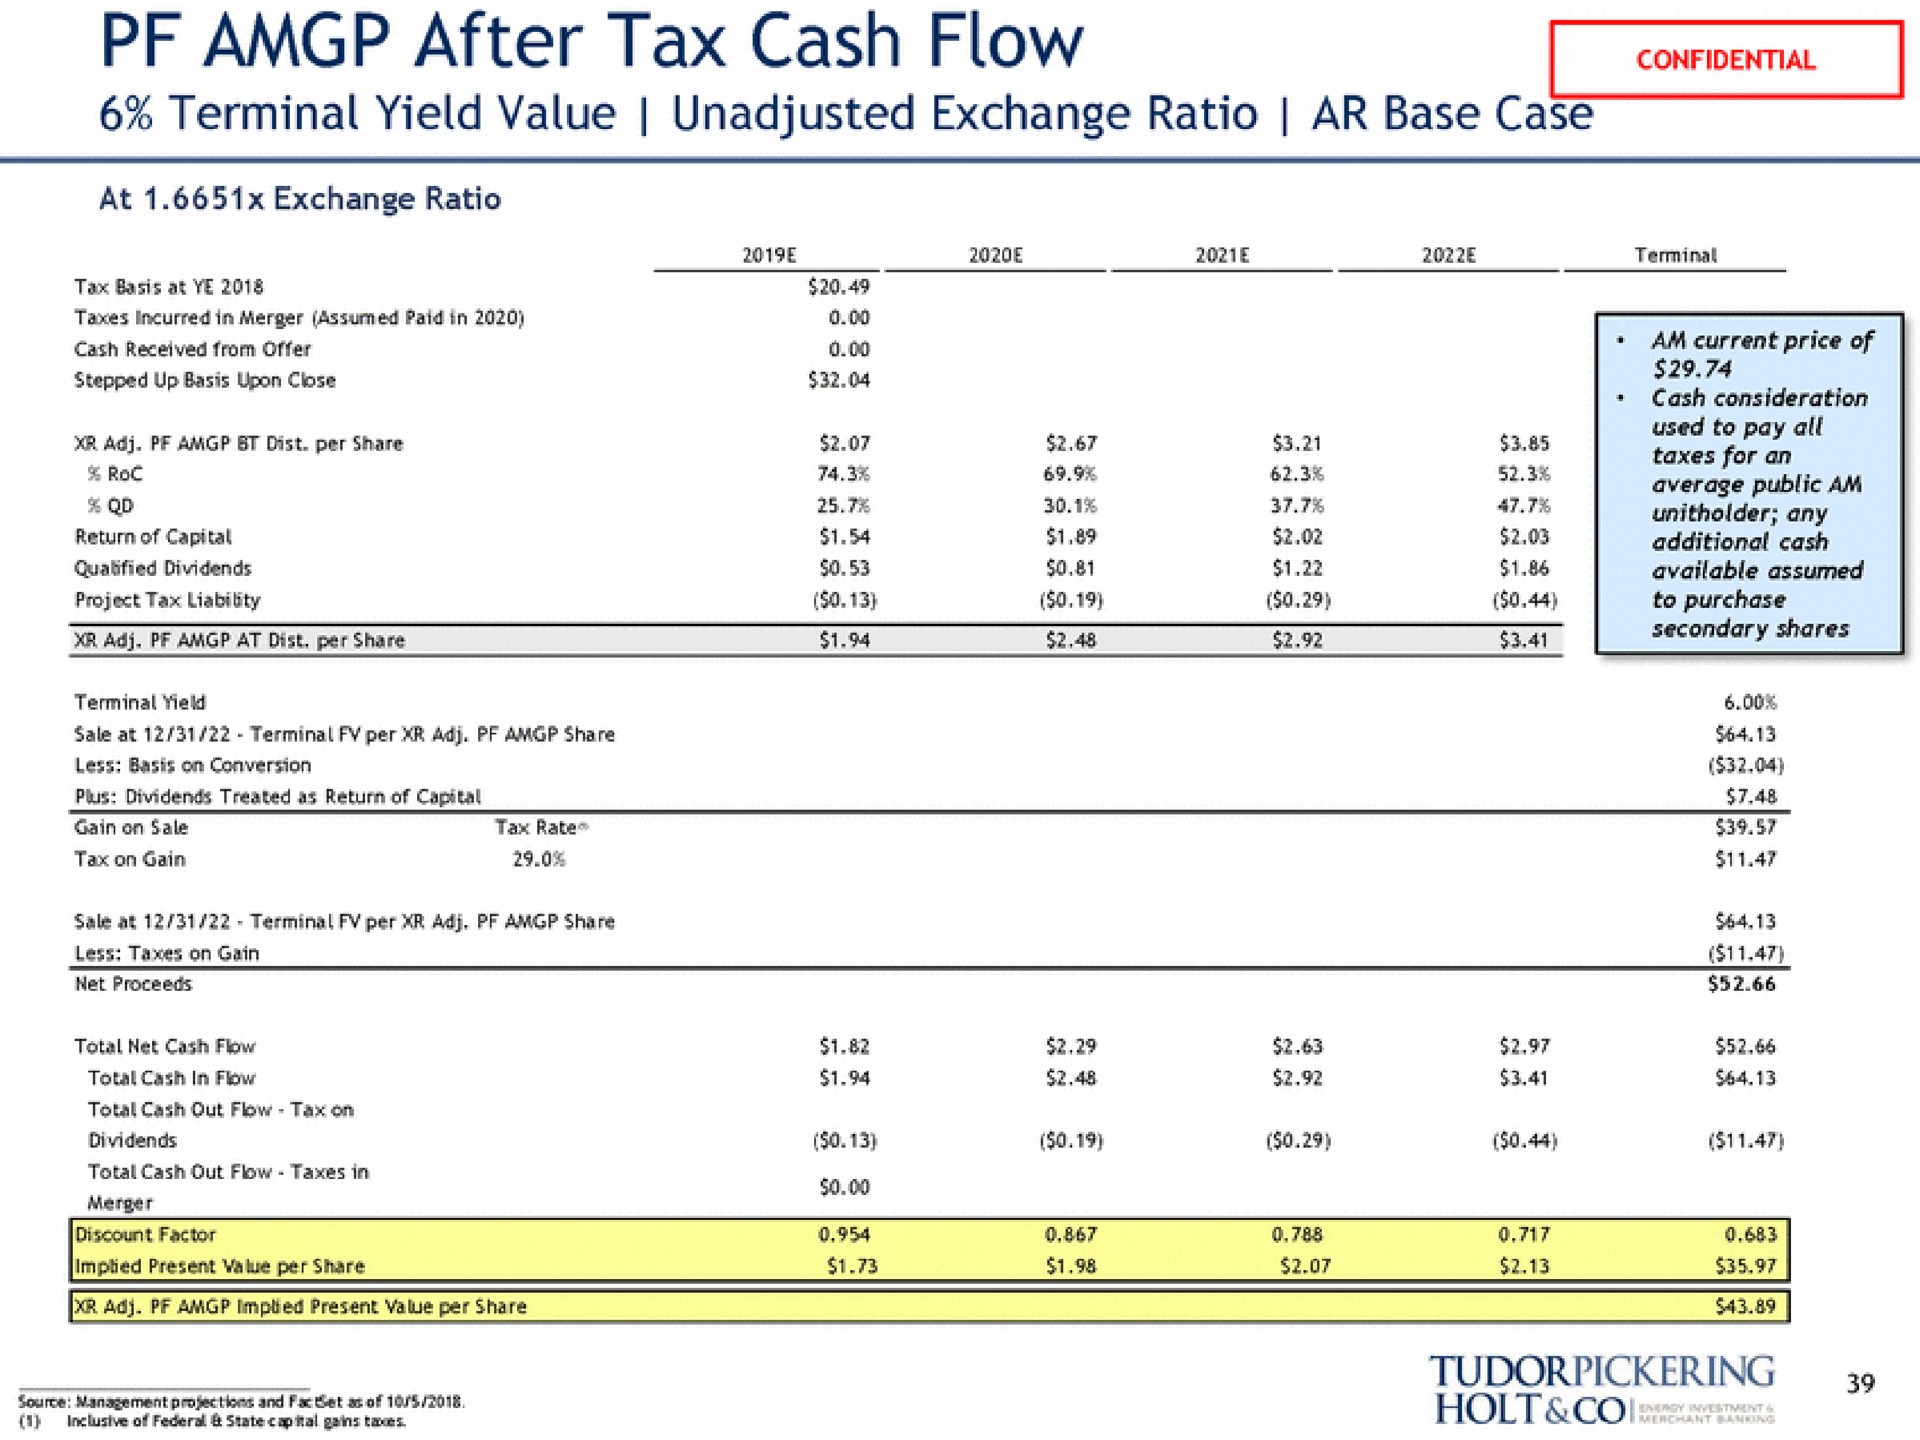 after tax cash flow terminal yield value unadjusted exchange ratio base case confidential holt | Tudor, Pickering, Holt & Co